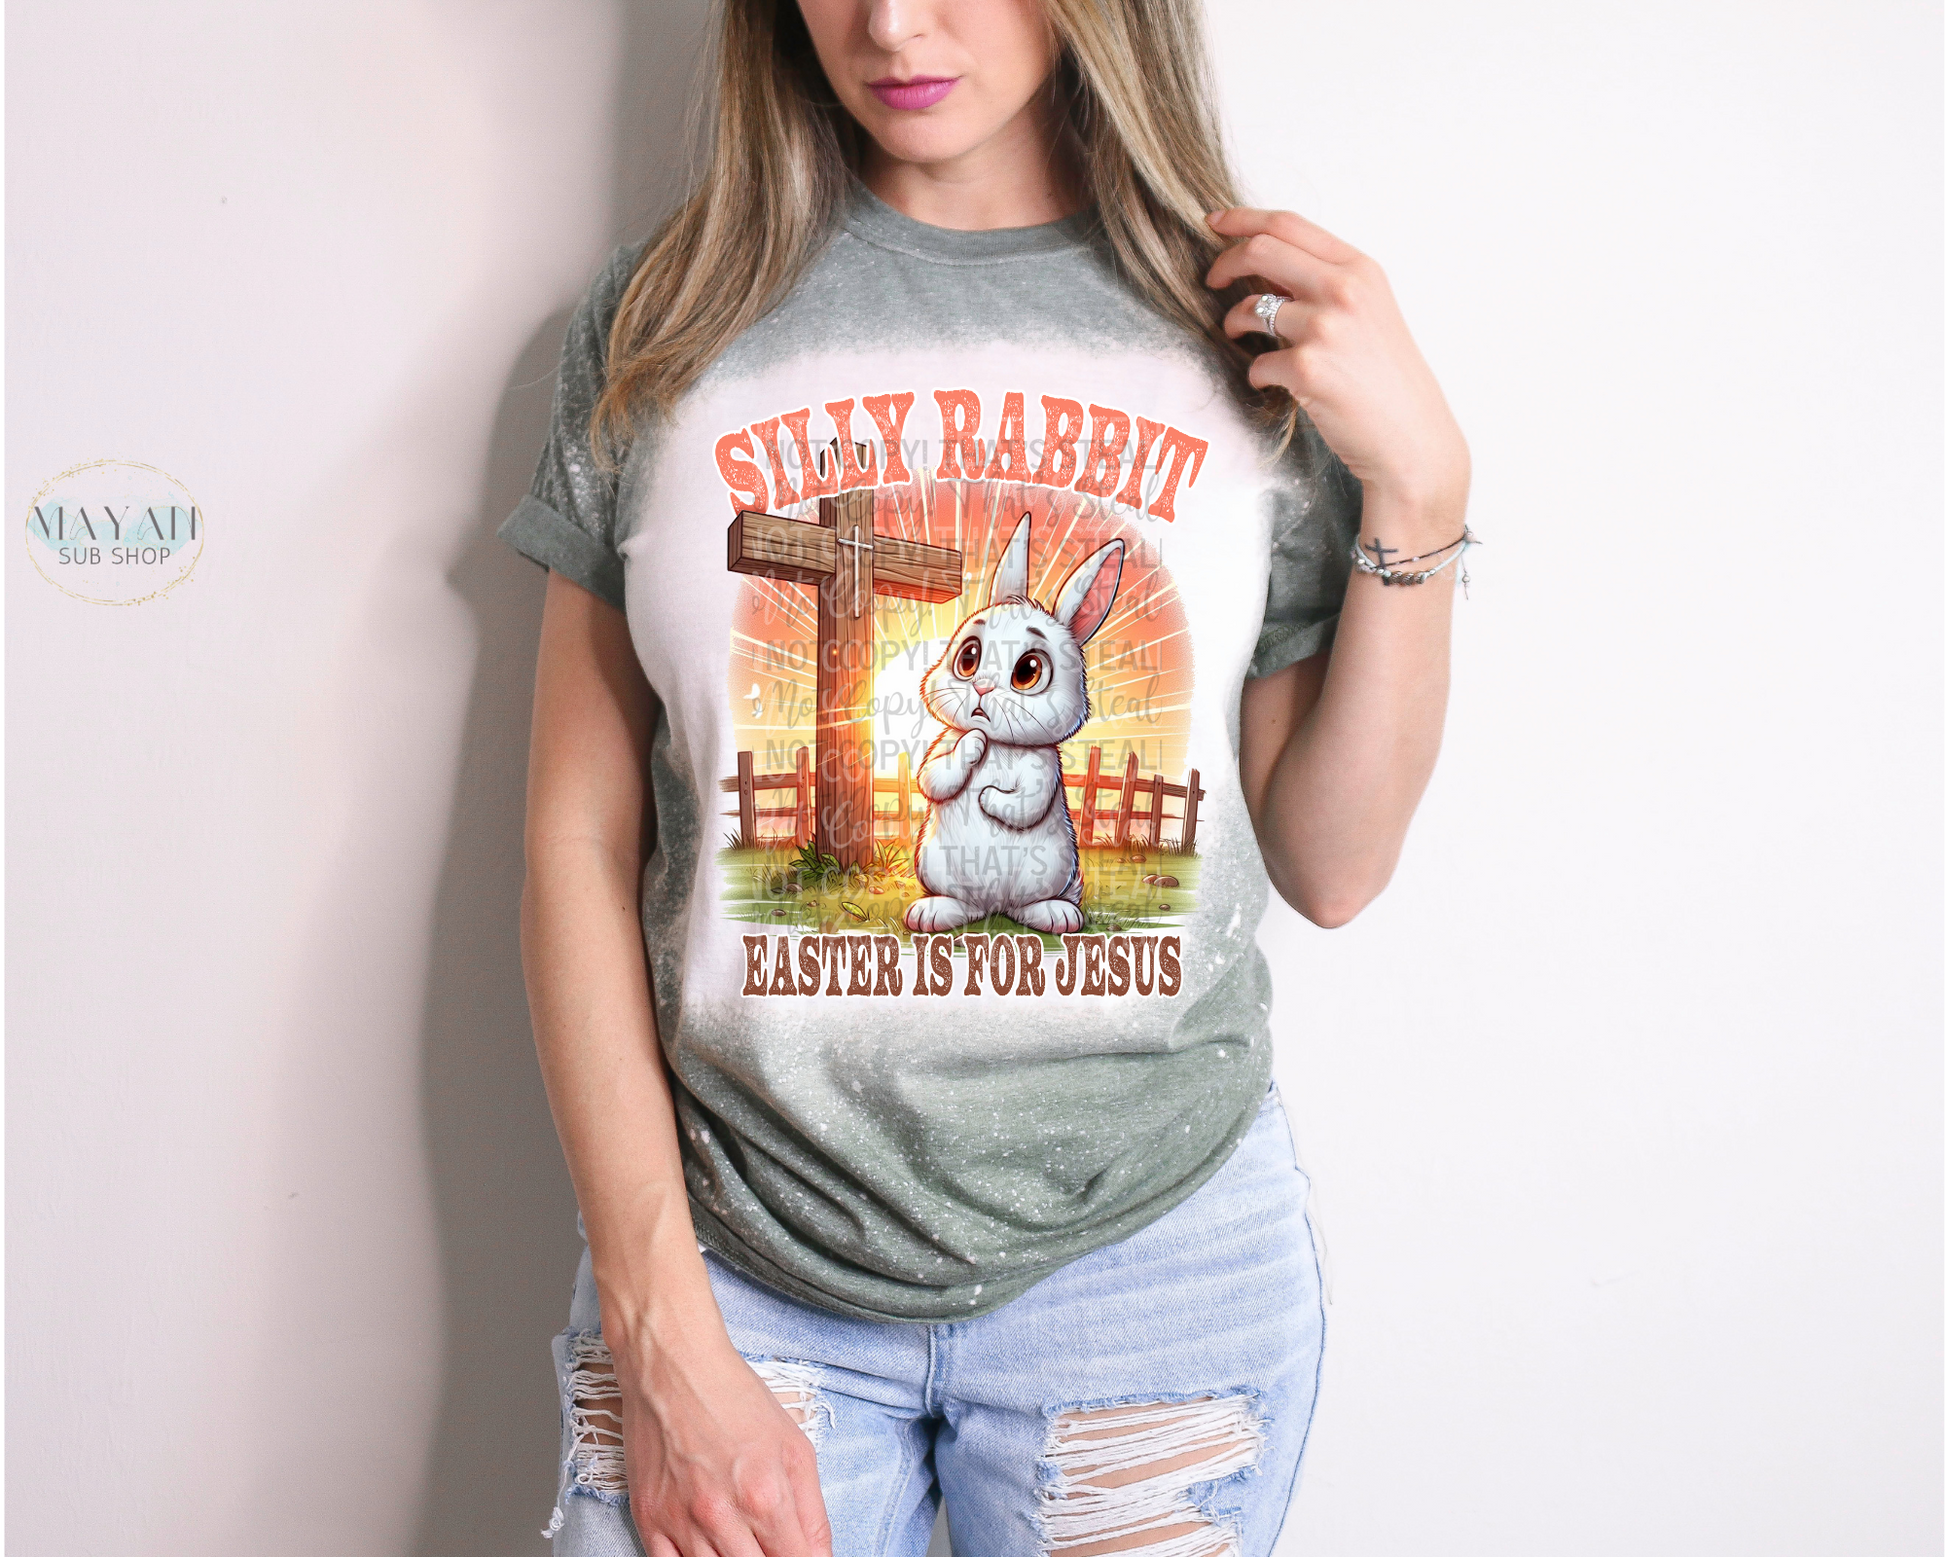 Easter is for Jesus bleached tee. -Mayan Sub Shop